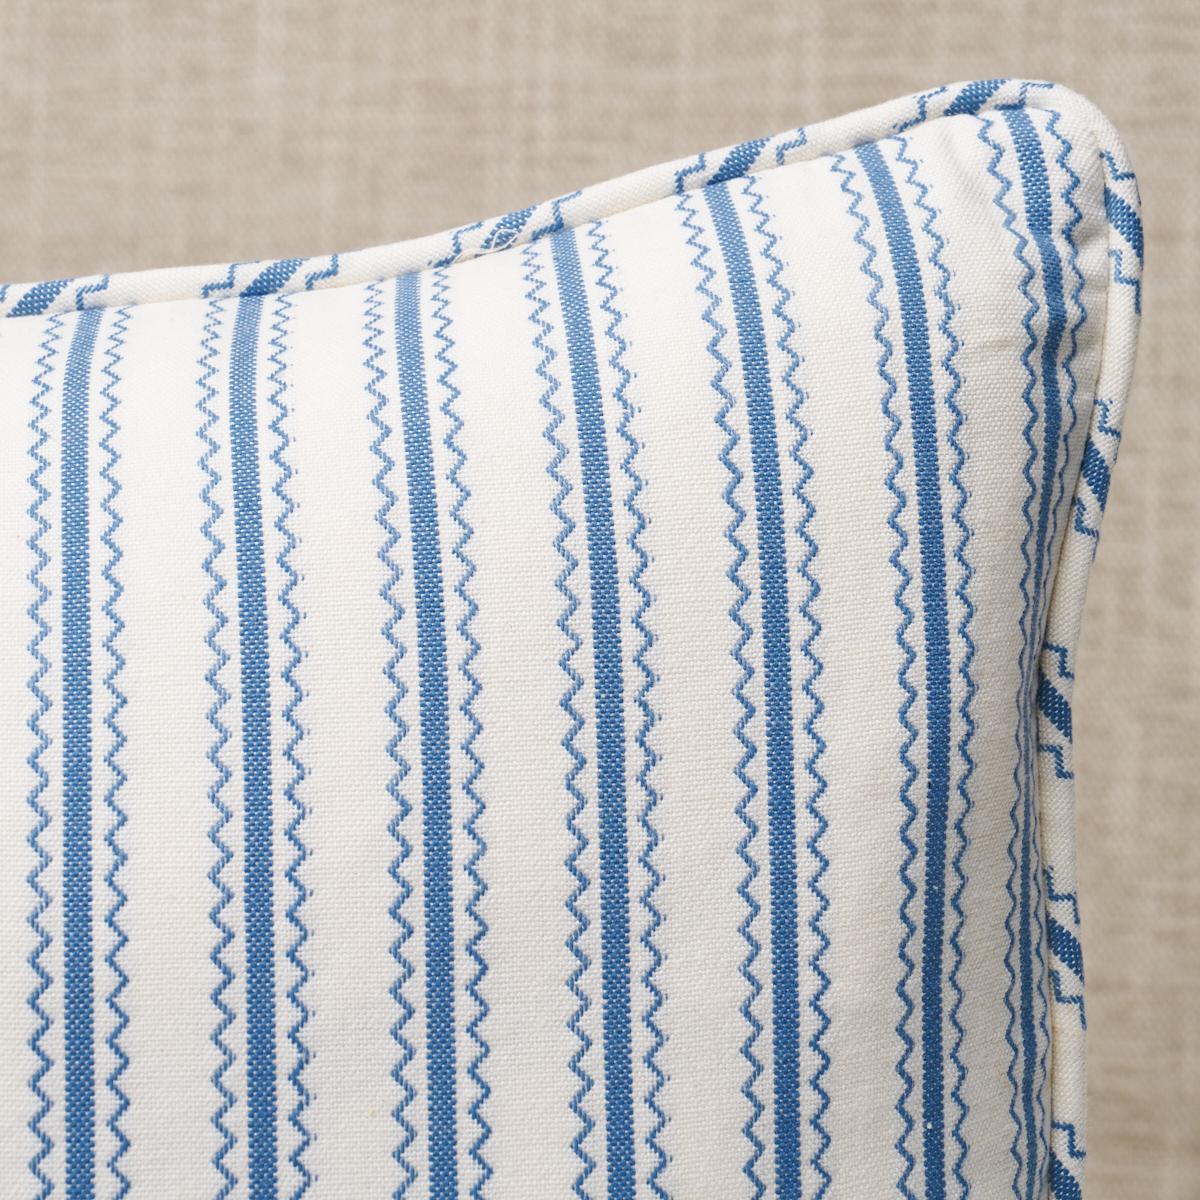 This pillow features Birdie Ticking Stripe by Mark D. Sikes with a self welt finish. Created by Mark D. Sikes, Birdie Ticking Stripe is a fresh take on a familiar form. A stylish and perfectly proportioned small-scale stripe with a unique zigzag